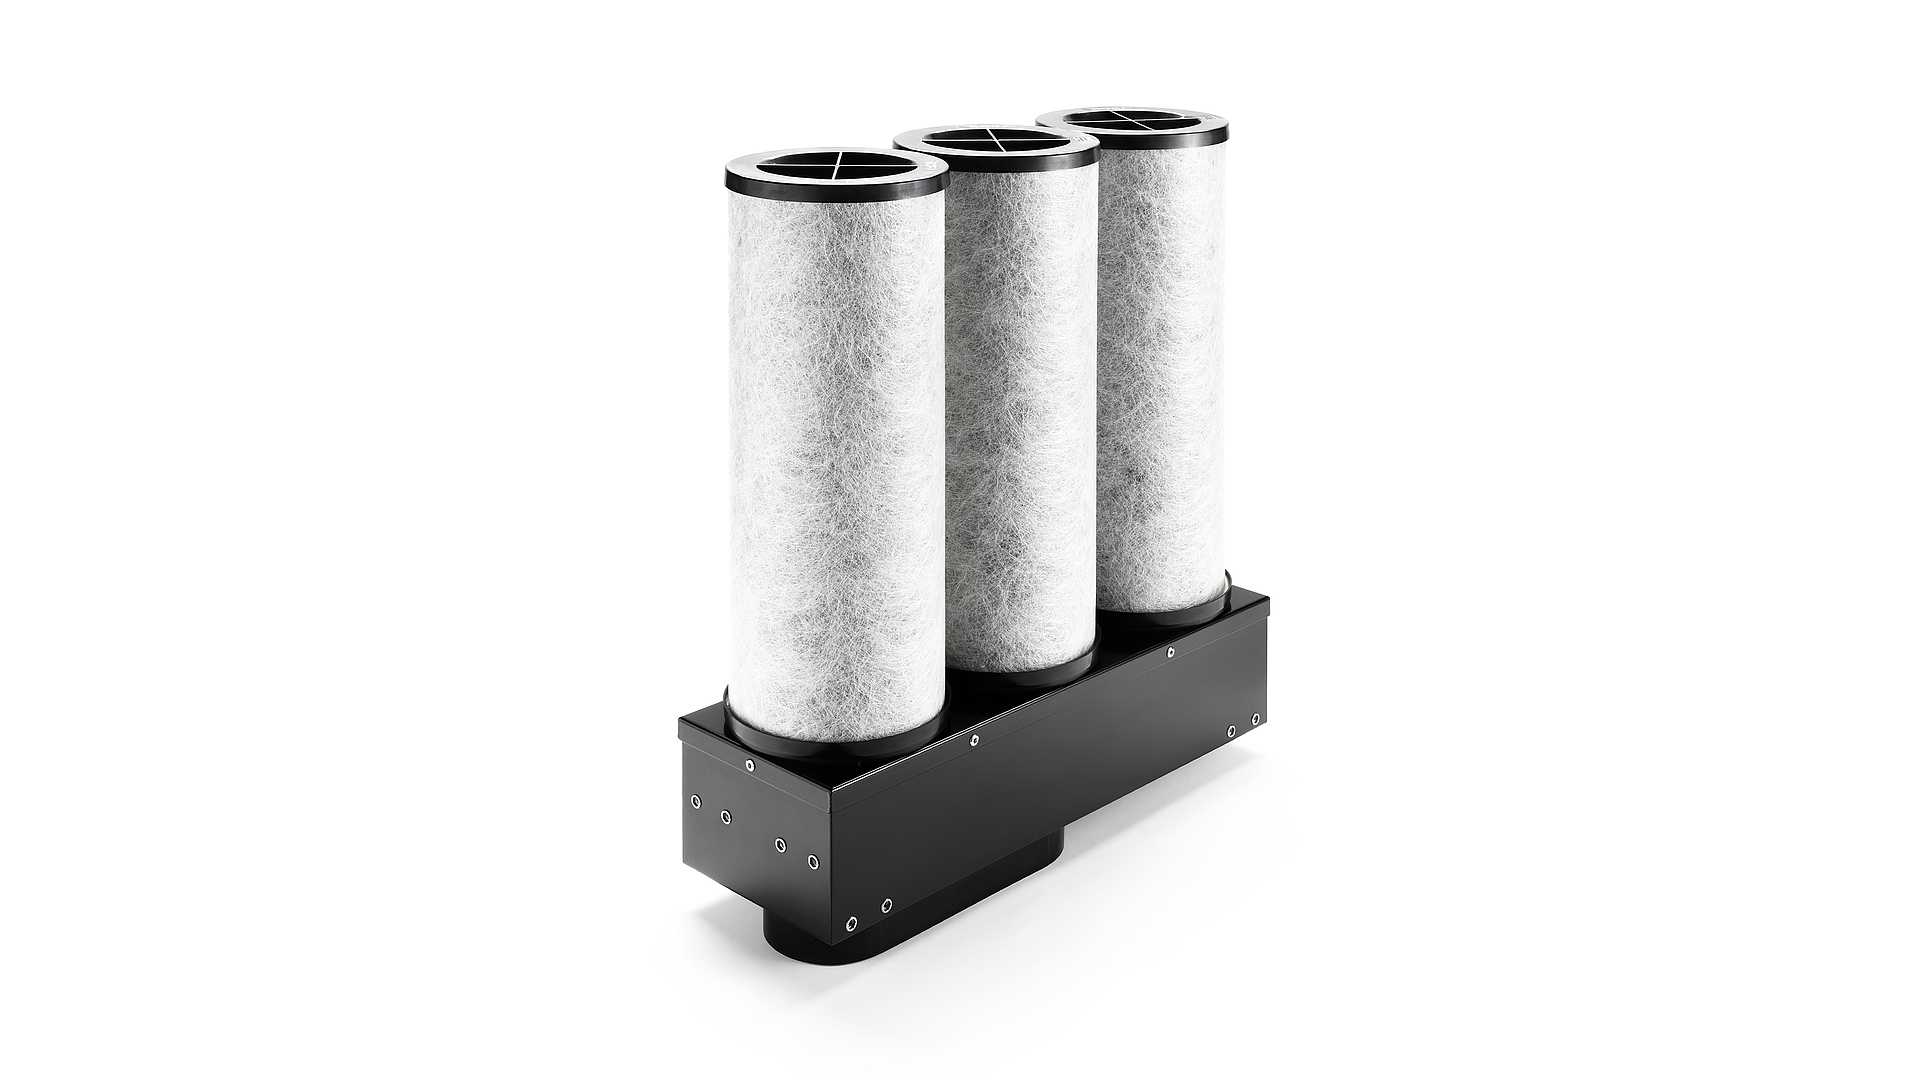 ACTIVATED CARBON FILTER Set: Activated Carbon Filters for Bora